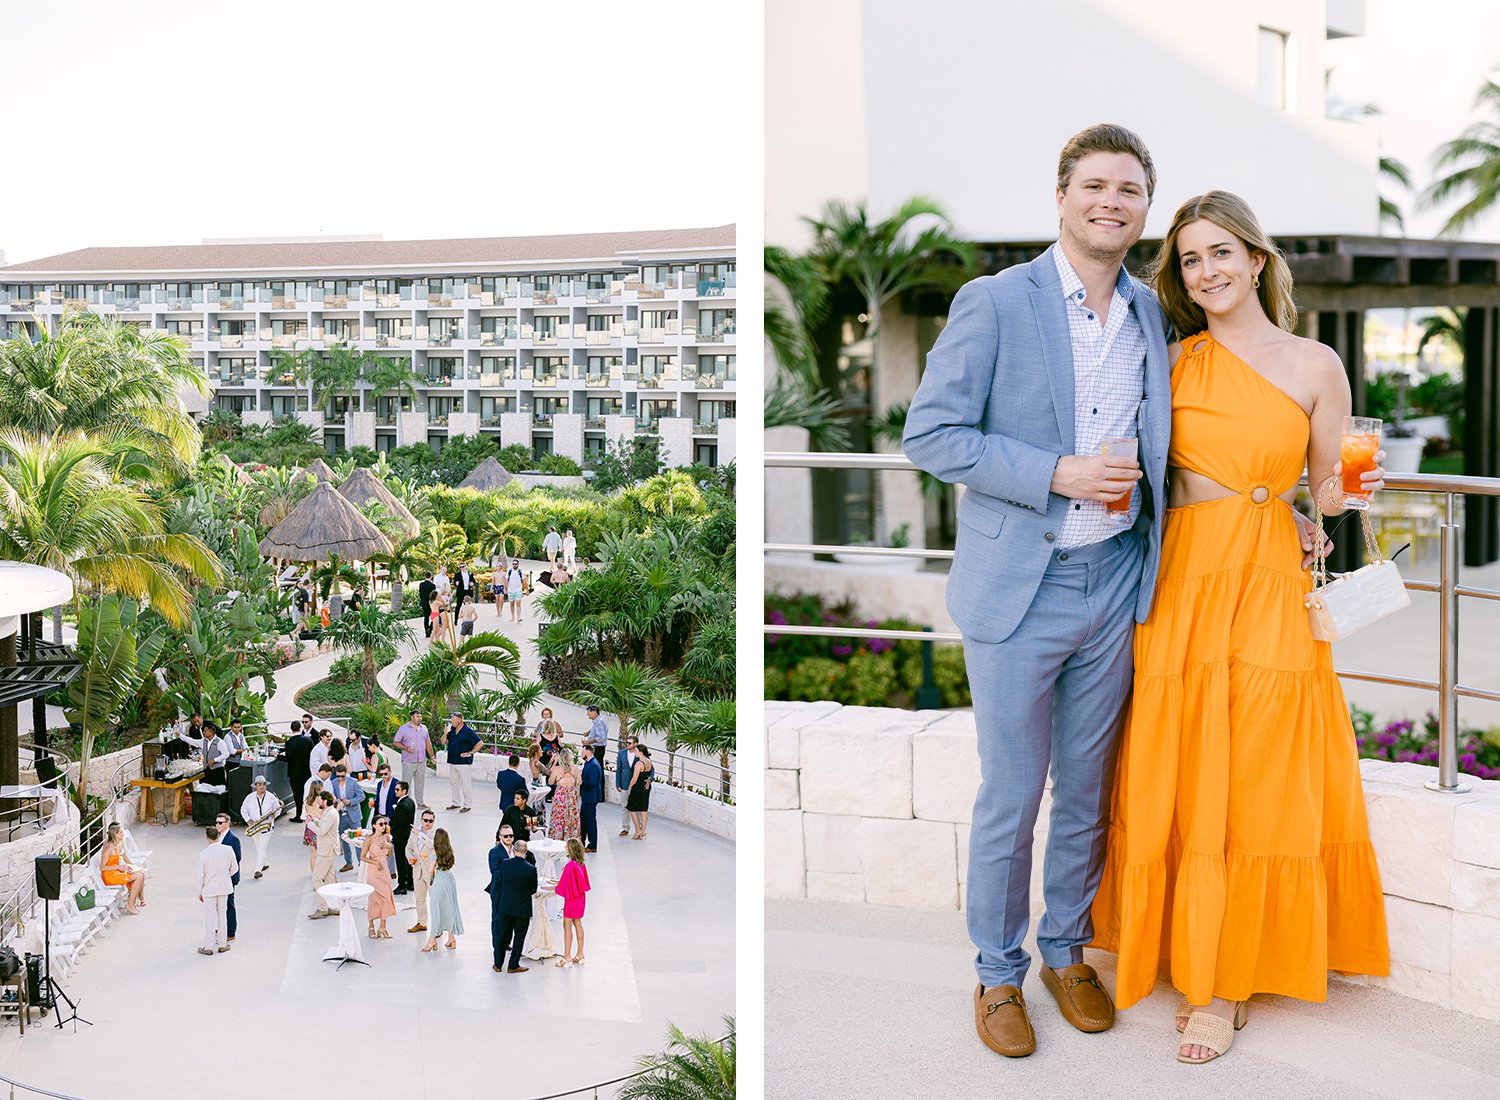 38 wonderful view of wedding guests gathering around at wedding cocktail hour over a terrace with palm trees behind and lovely wedding guests couple wearing fine clothes and nice orange dress smiling and drinking cocktails at Dreams Riviera Cancun.JPG